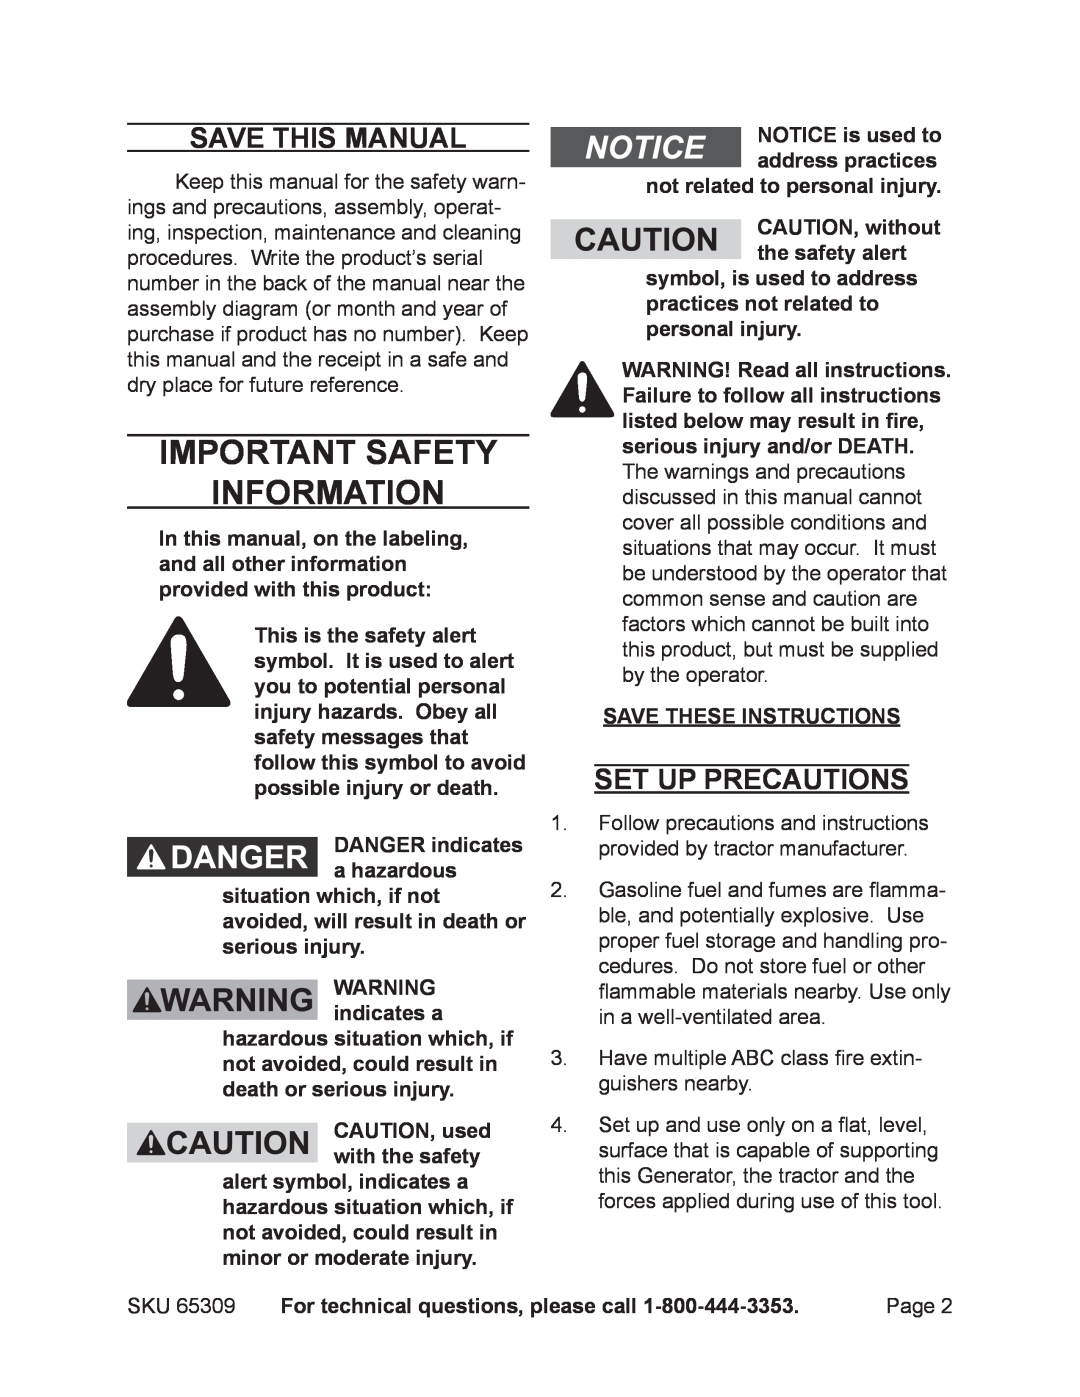 Harbor Freight Tools 65309 manual Important SAFETY Information, Save This Manual, Set up precautions 